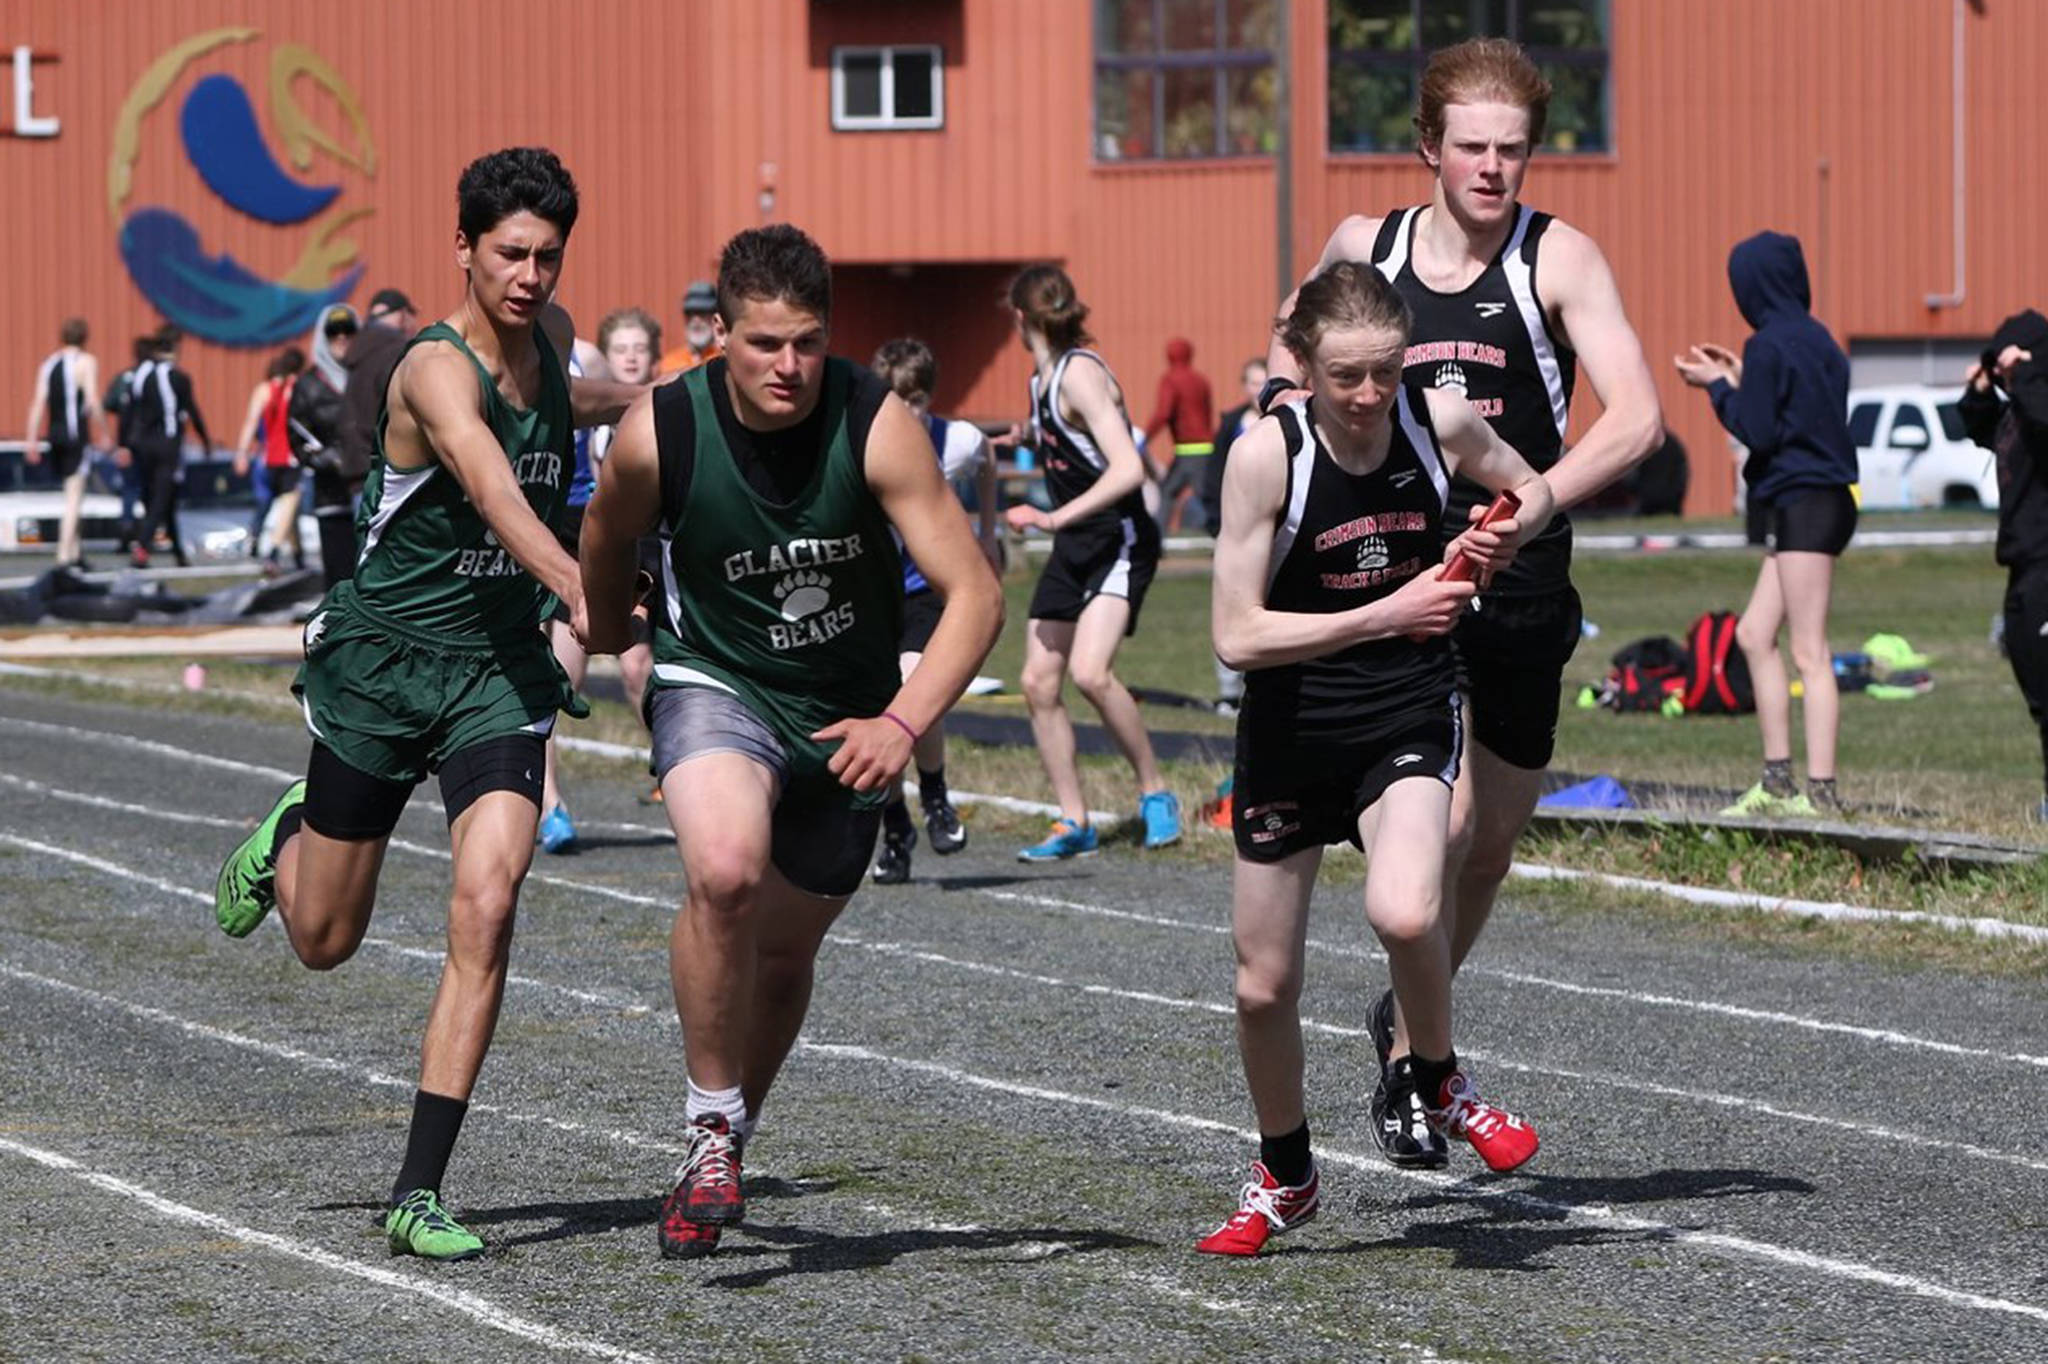 Juneau-Douglas High School’s Aaron Blust, right, accepts the baton from Owen Squires during a relay race at the Haines Invitational in Haines last weekend. (Courtesy Photo | Lori Giddings)